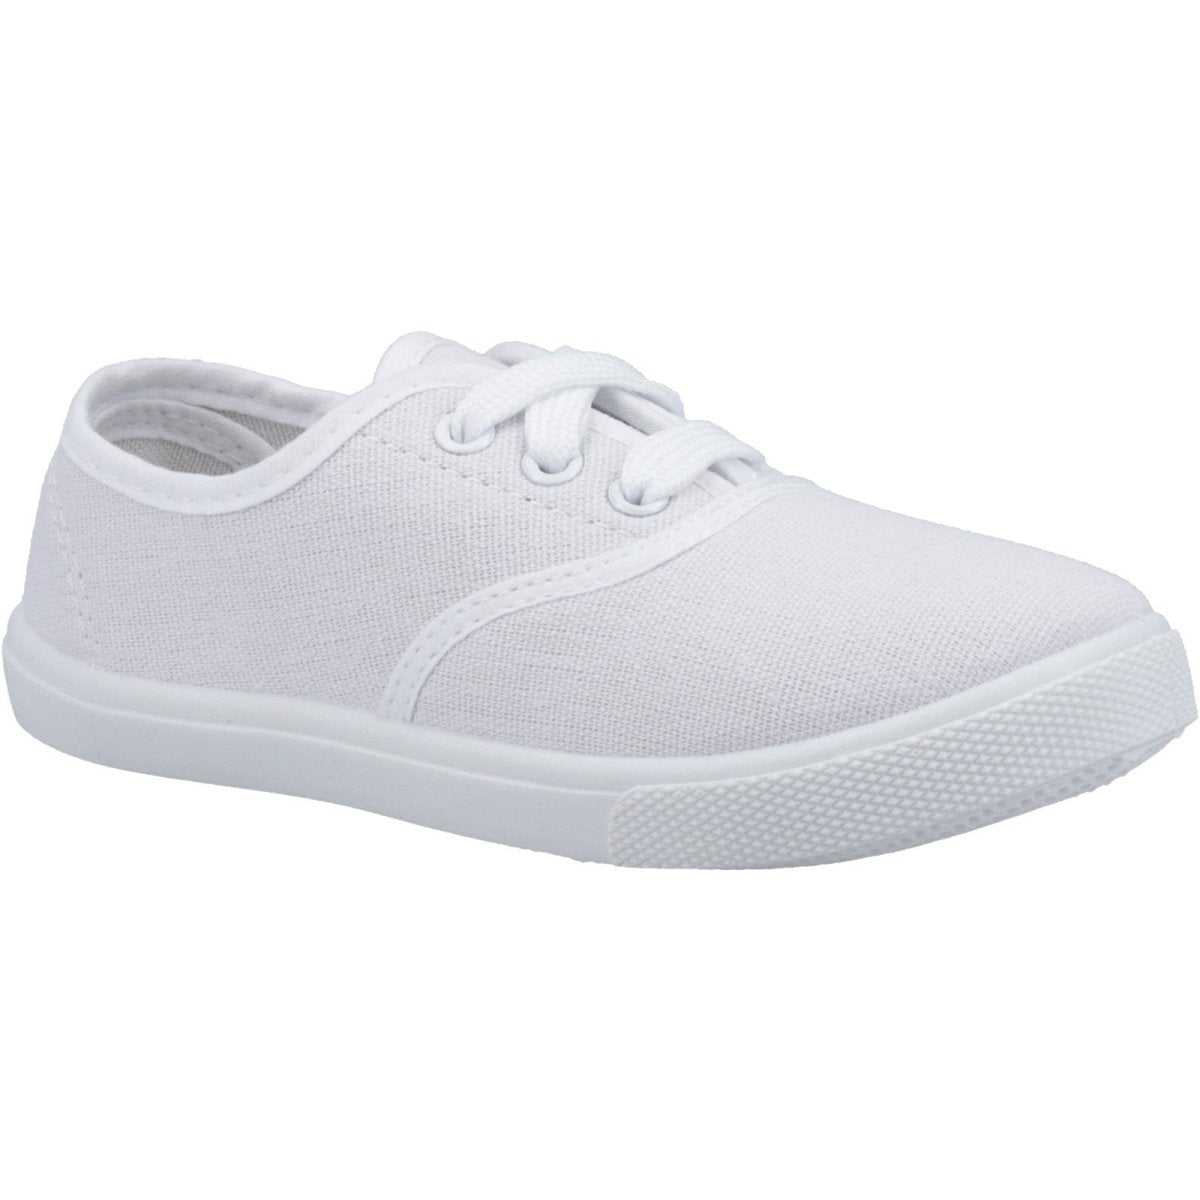 Group Five GB Toddlers Plimsolls - Shoe Store Direct